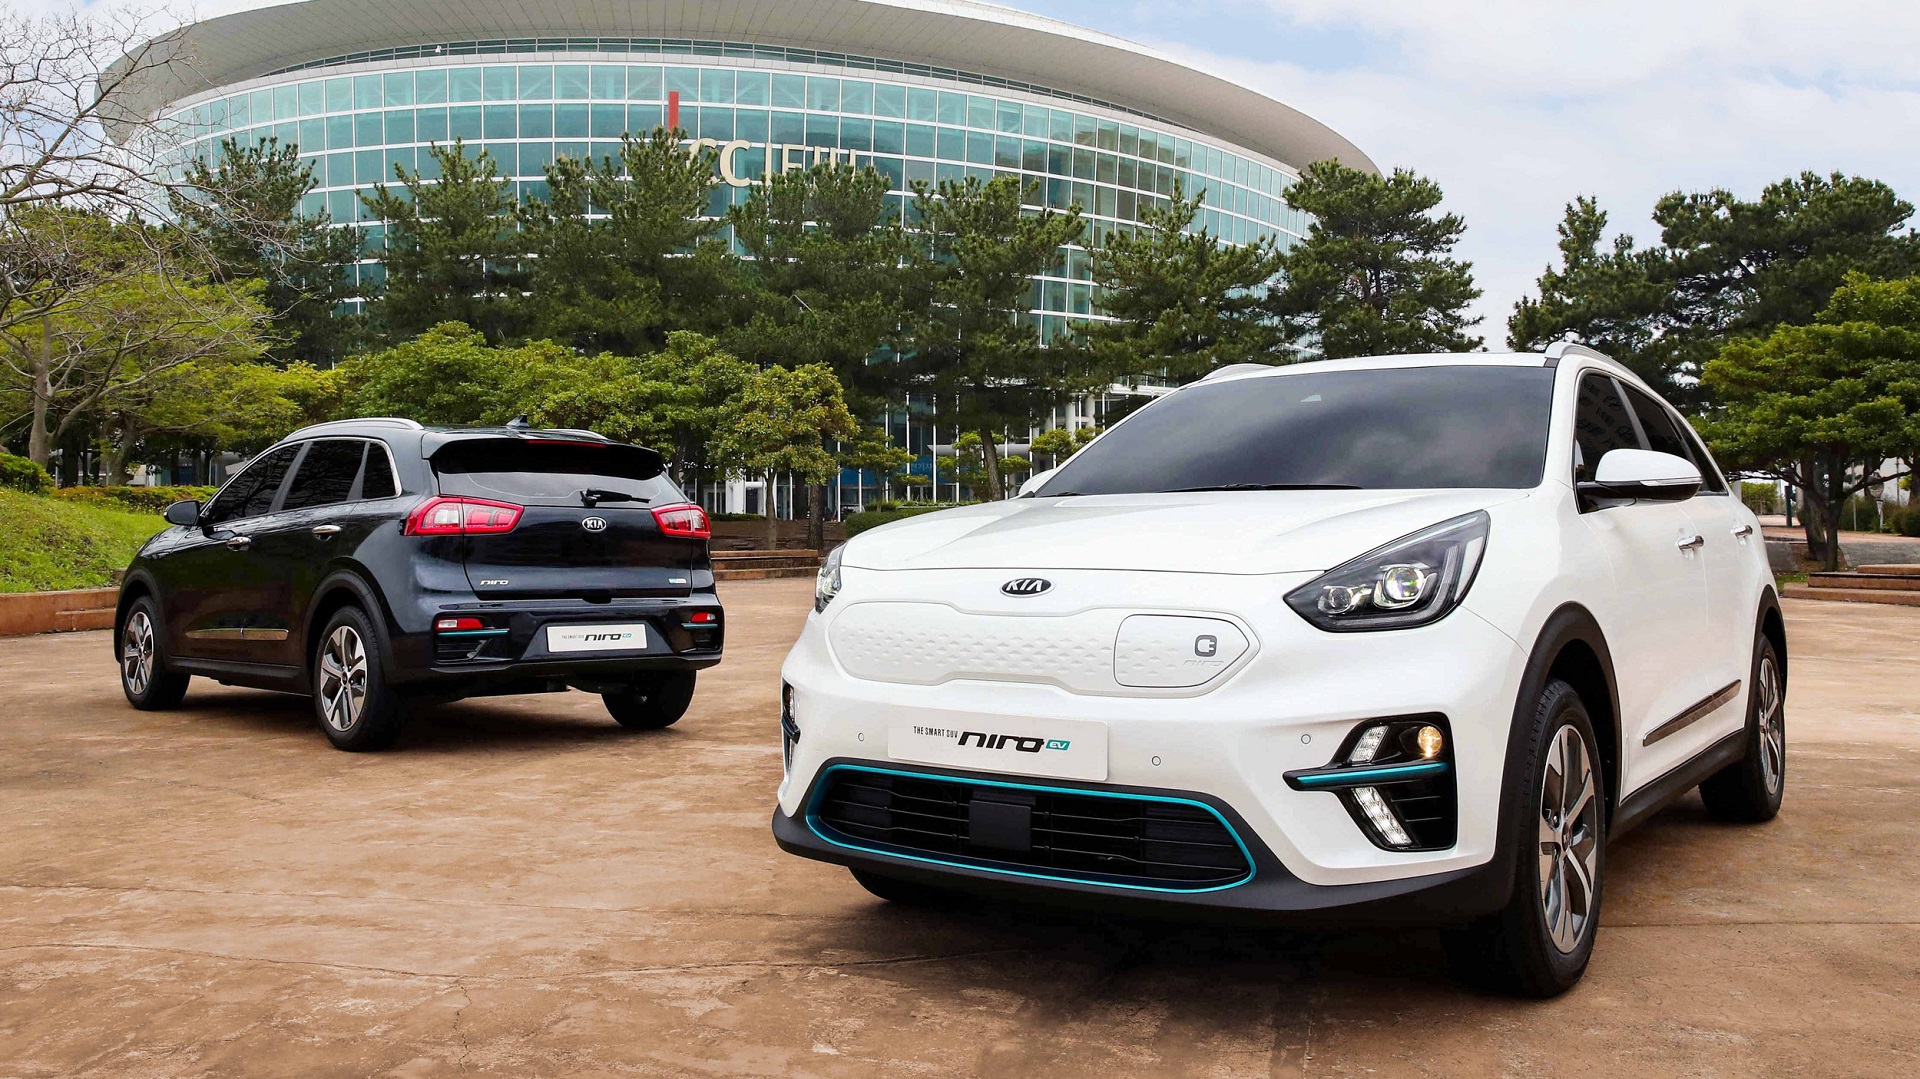 In 2019 there will be an electric KROS Niro EV with a new power plant and a power reserve of 300 km